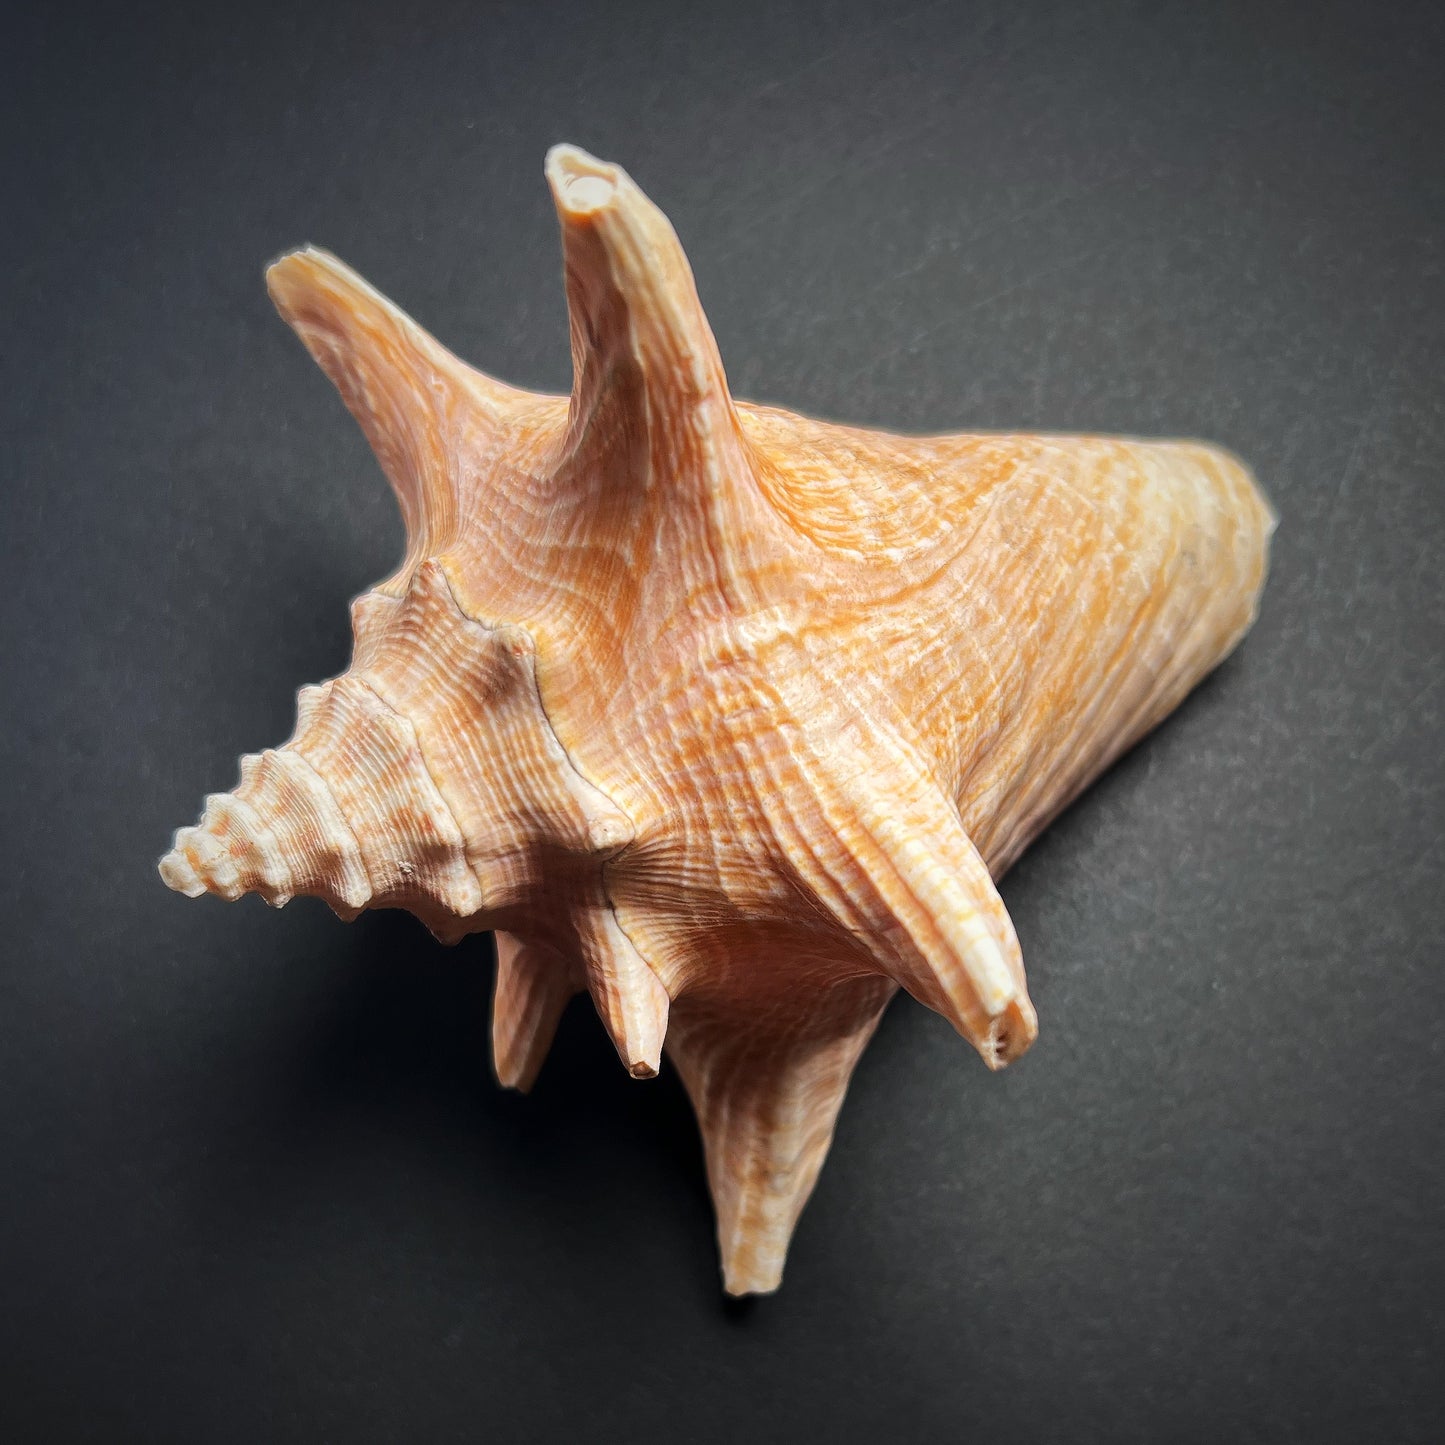 Conch shell - Aliger gigas, M size 